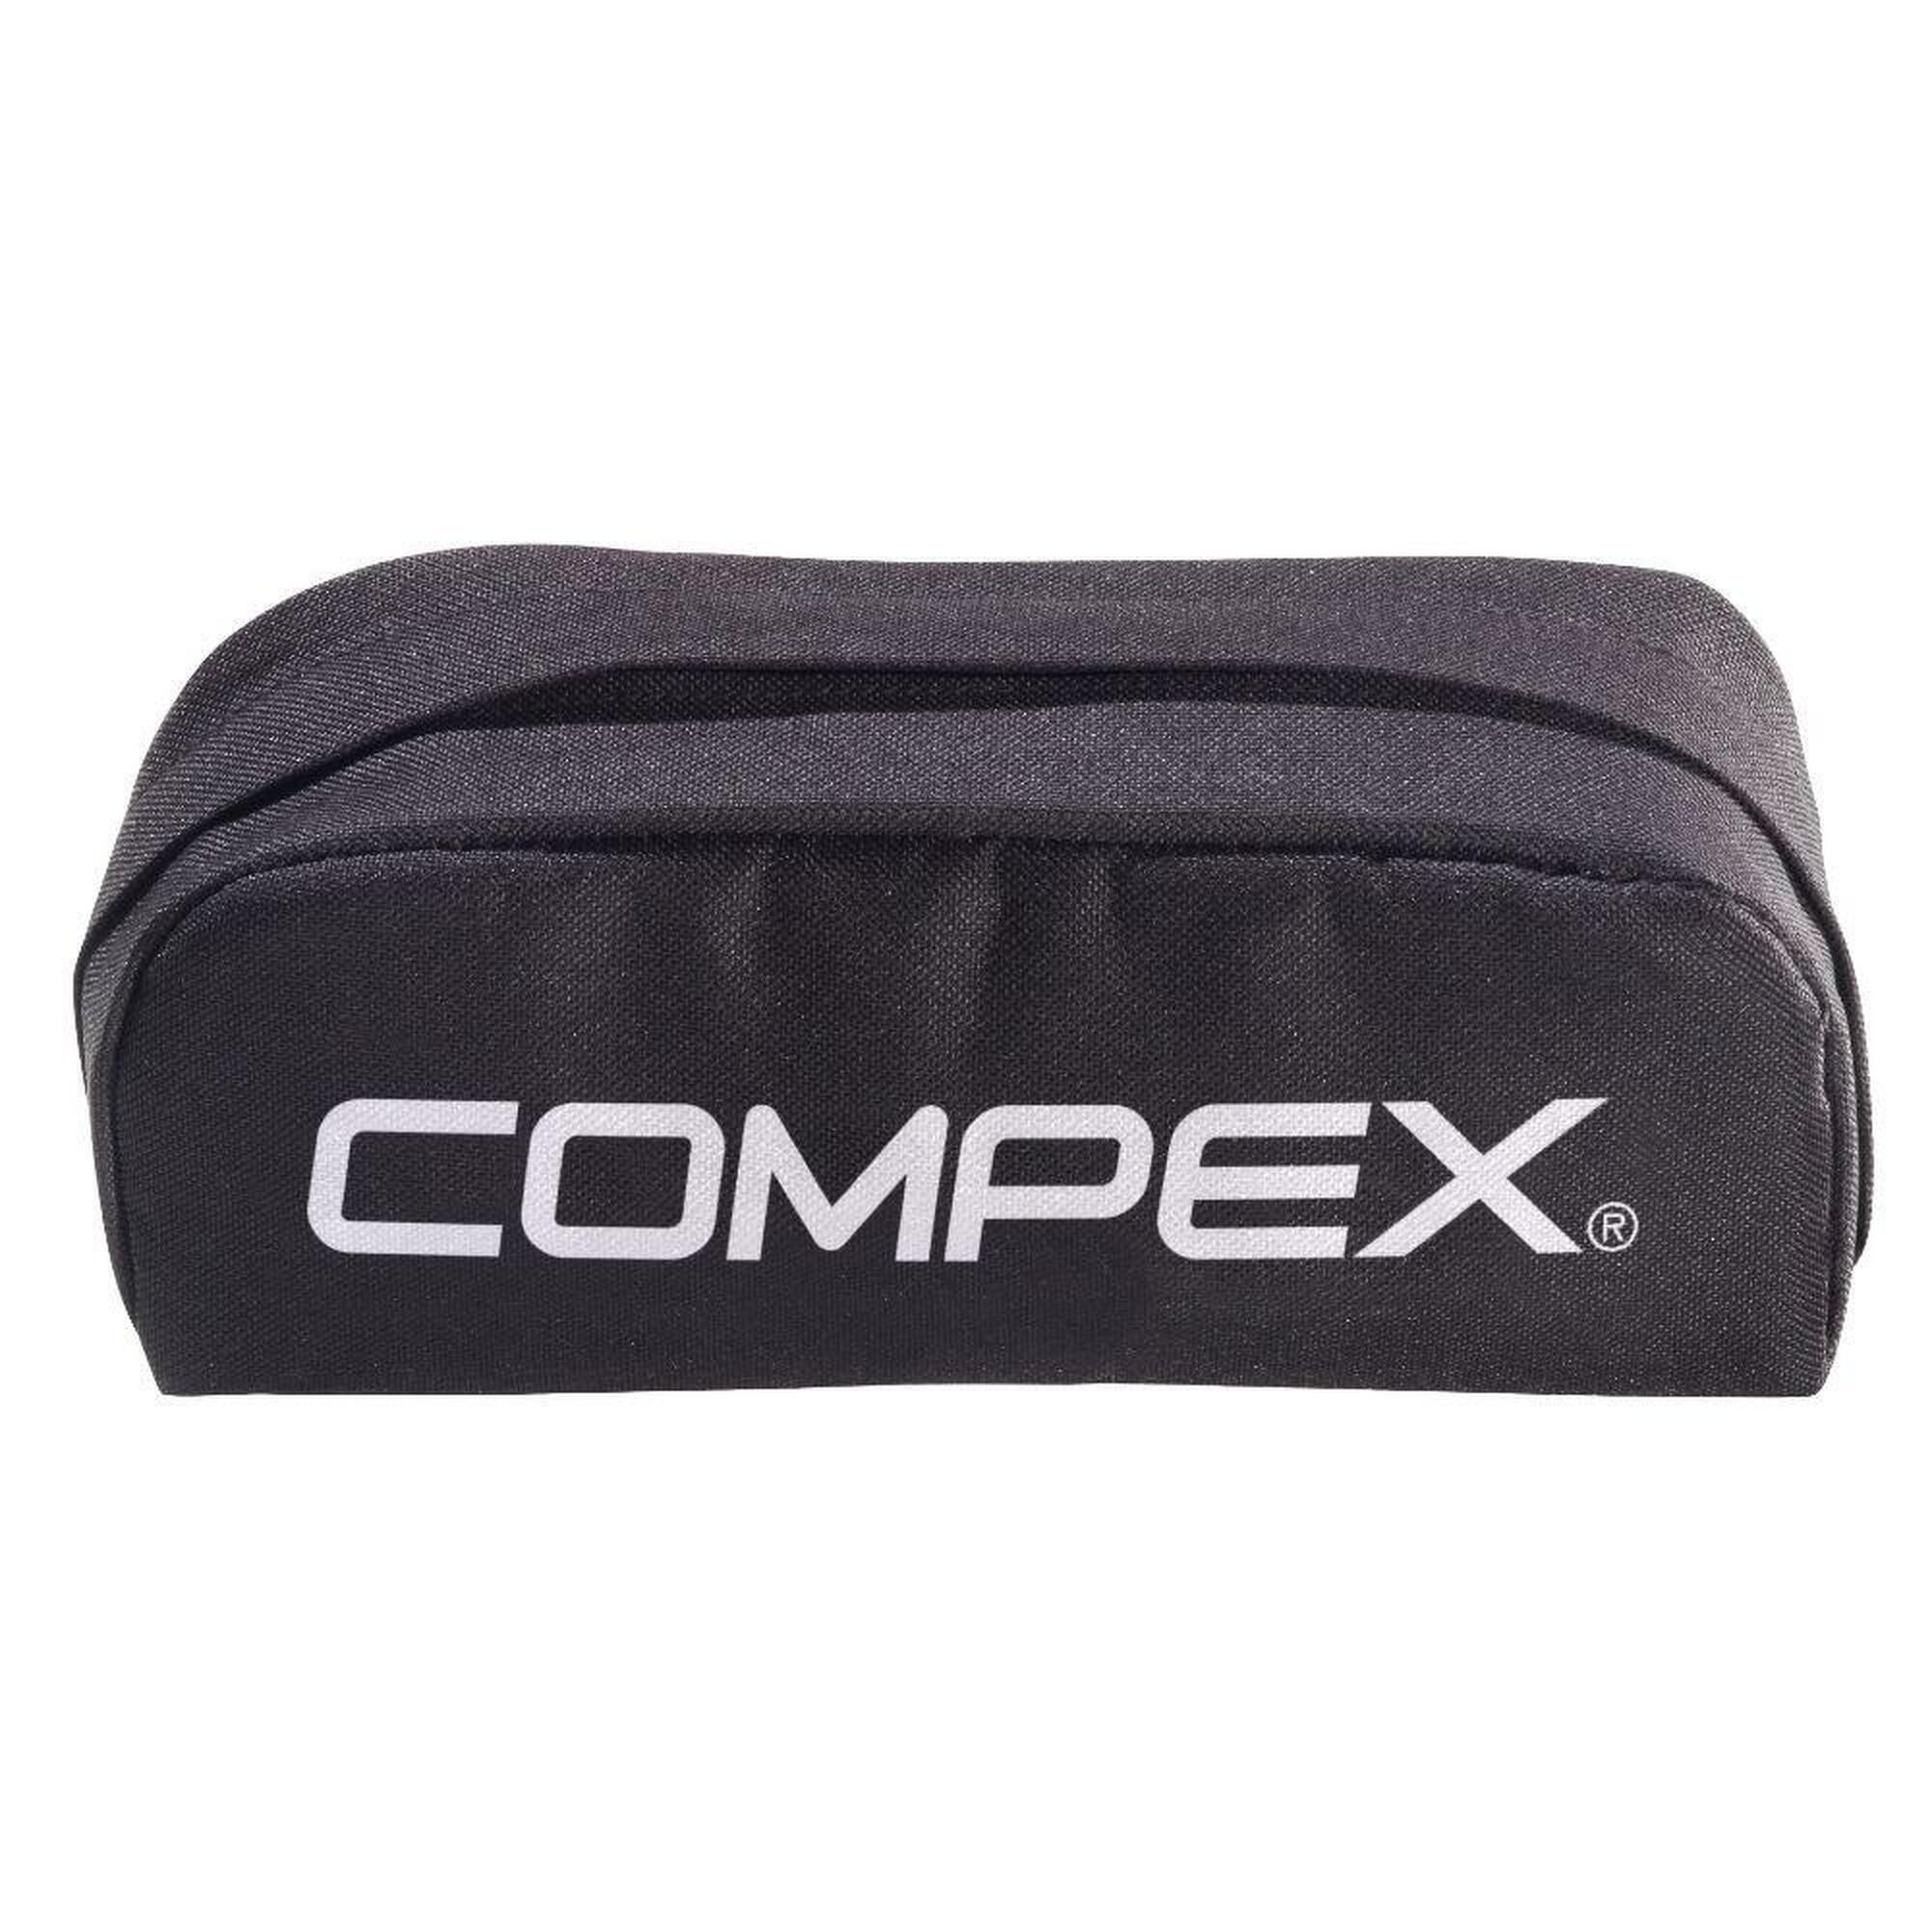 Compex Travel pouch wireless 1/1